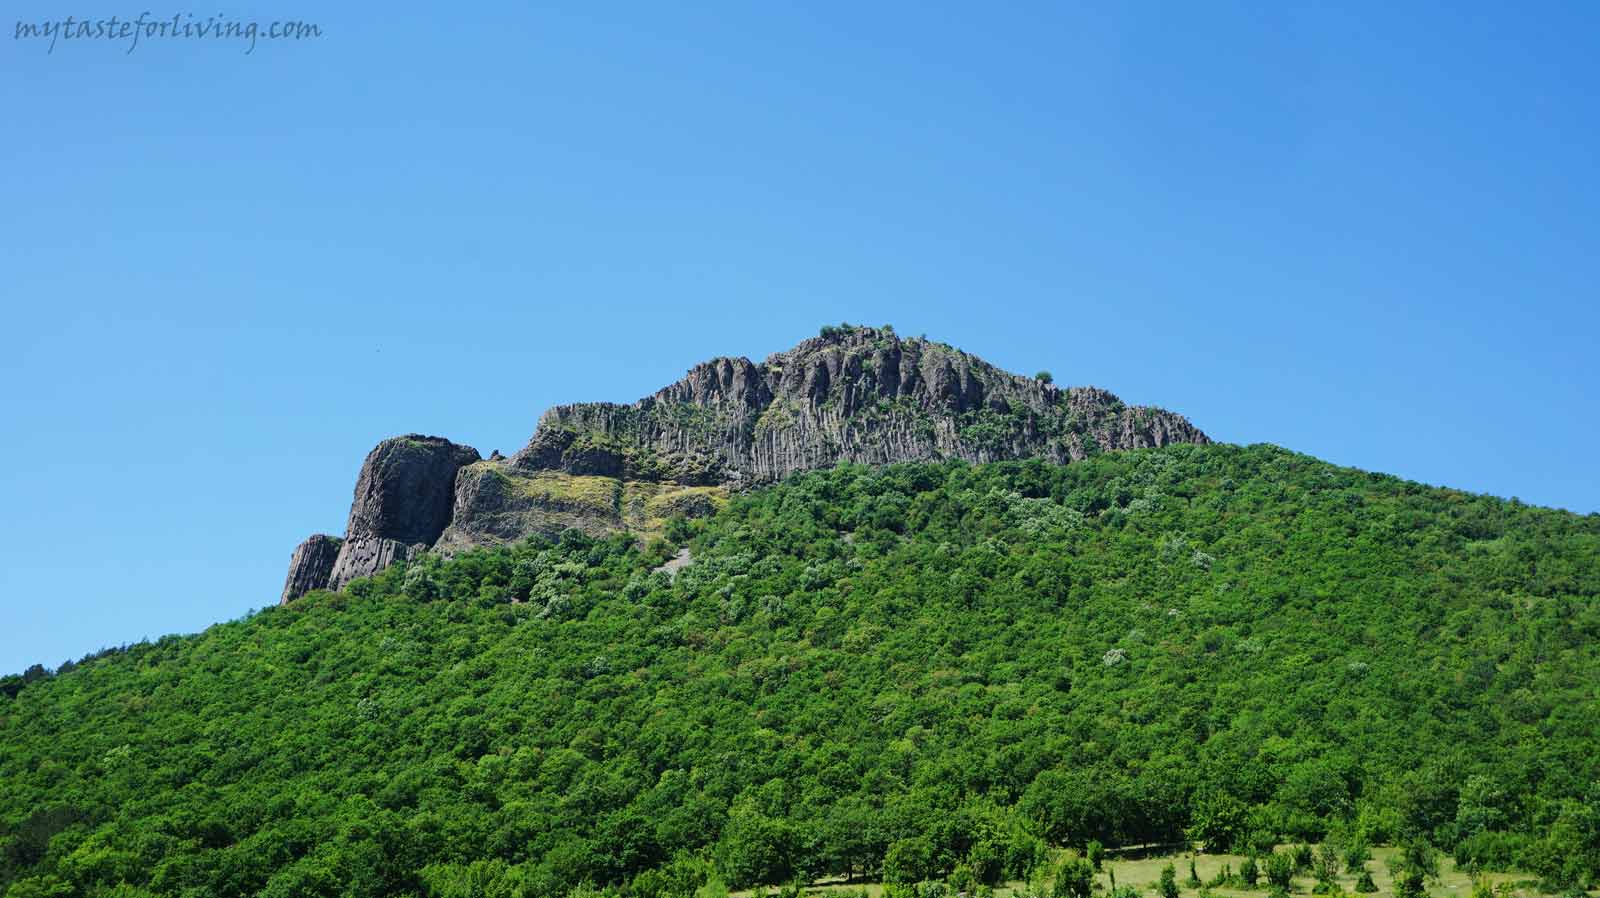 The medieval fortress and peak Monyak (Monek) are located about 11 km from the town of Kardzhali, Bulgaria, near the village of Shiroko Pole, above the dam Studen Kladenets. 